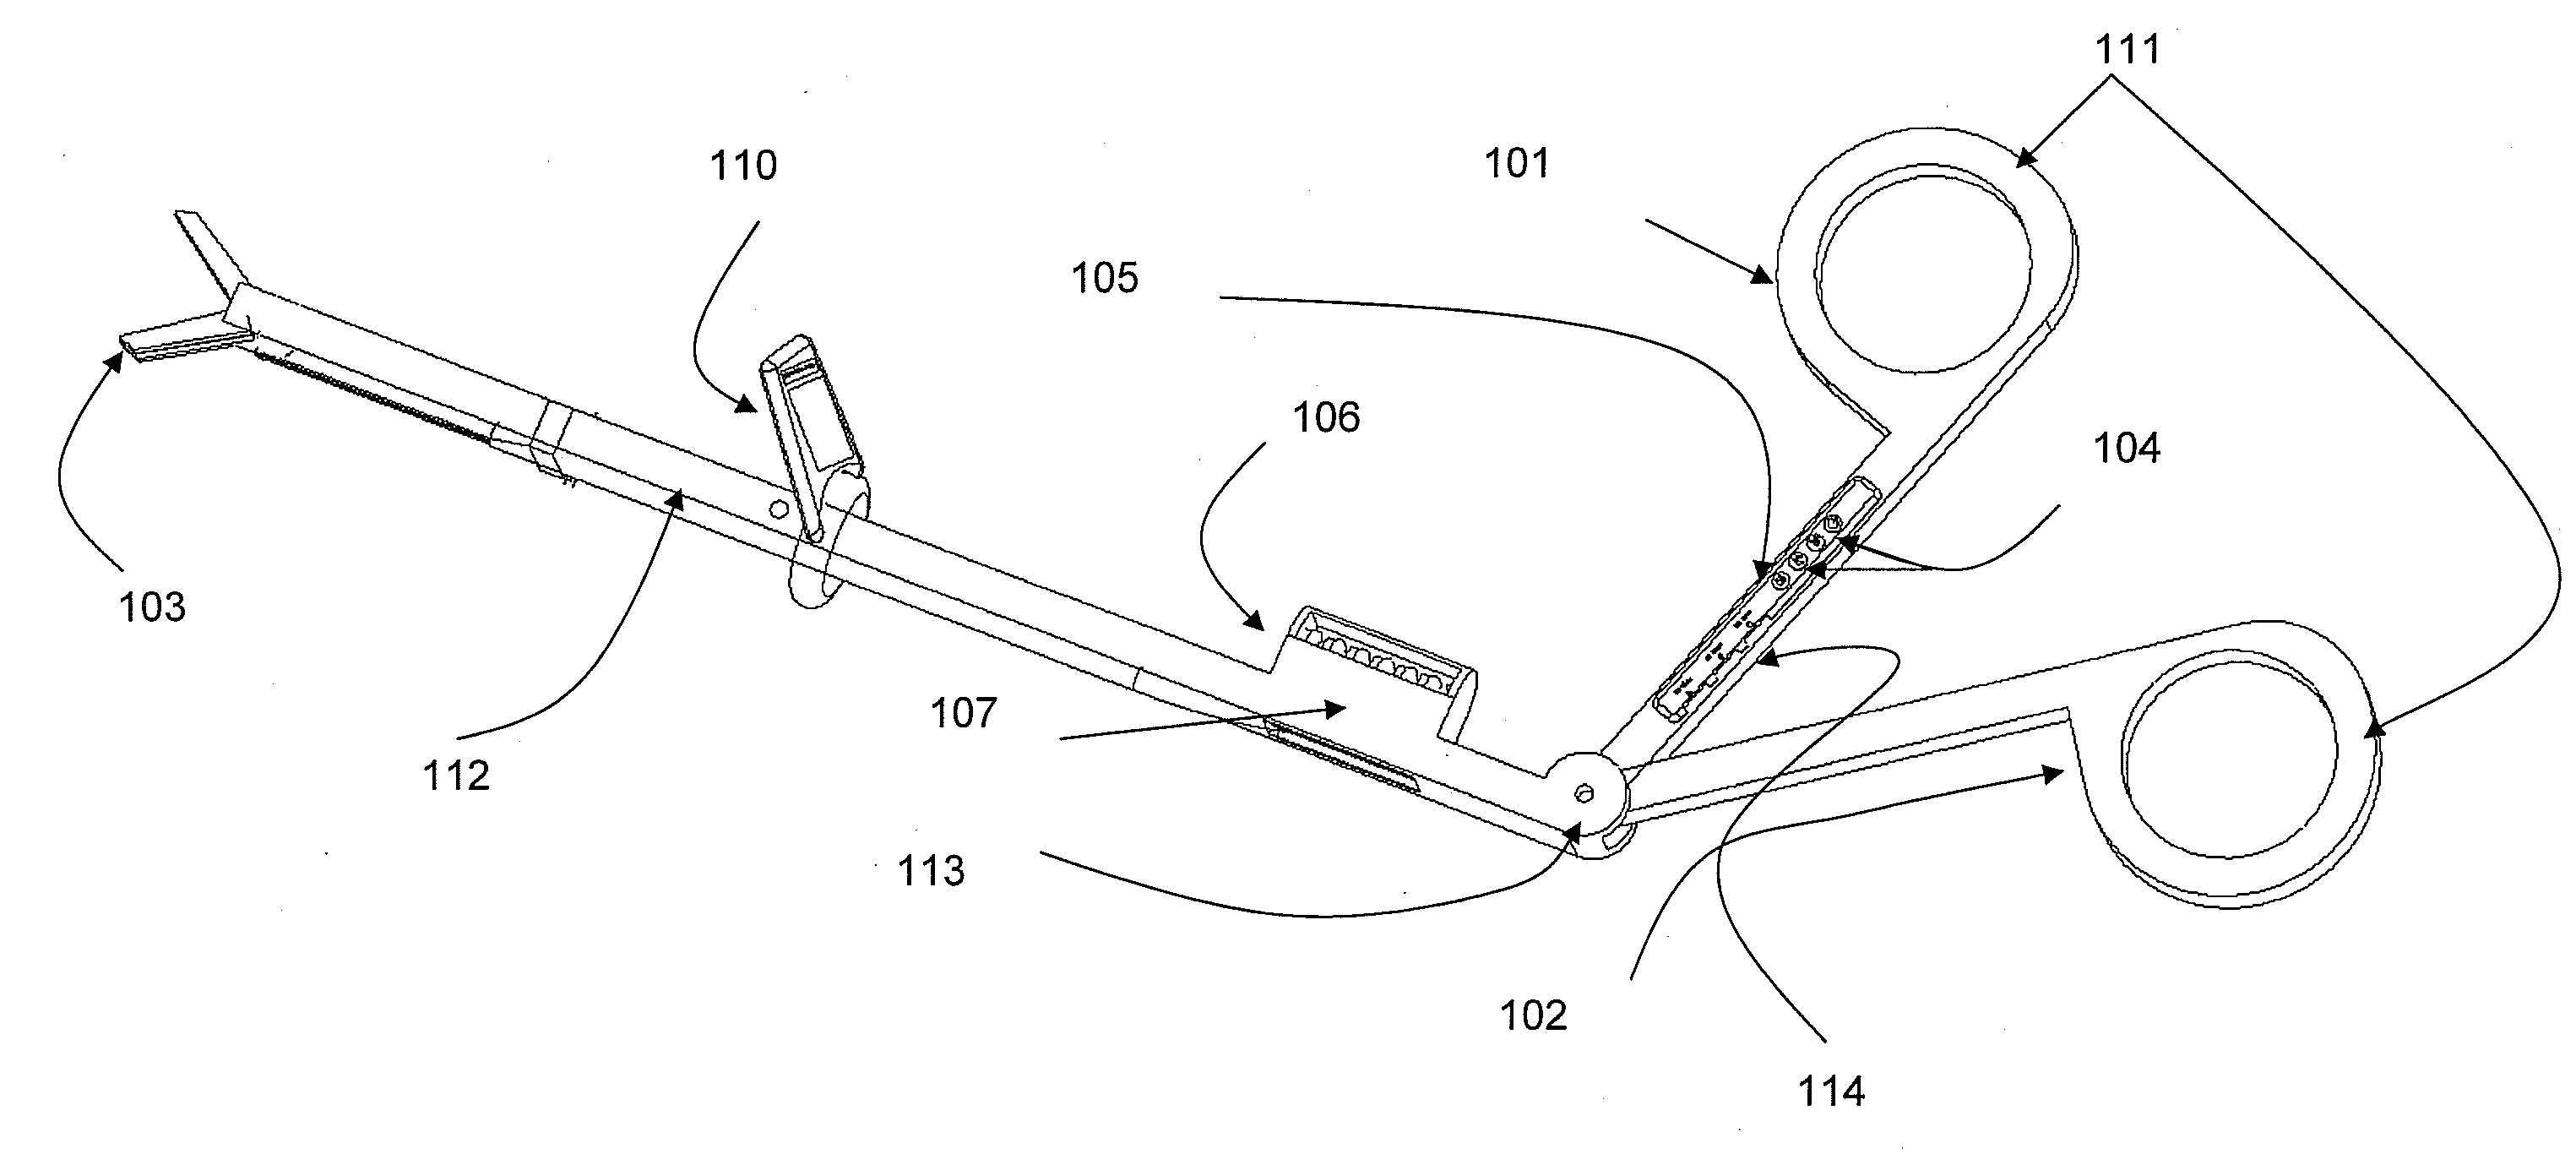 Tools for implantation and extraction of posteriorly placed lumbar articial discs including: a totally wireless electronically embedded action-ended endoscope utilizing differential directional illumination with digitally controlled mirrors and/or prisms, and a disc ball inserter , a plate extractor, and rescue disc plates